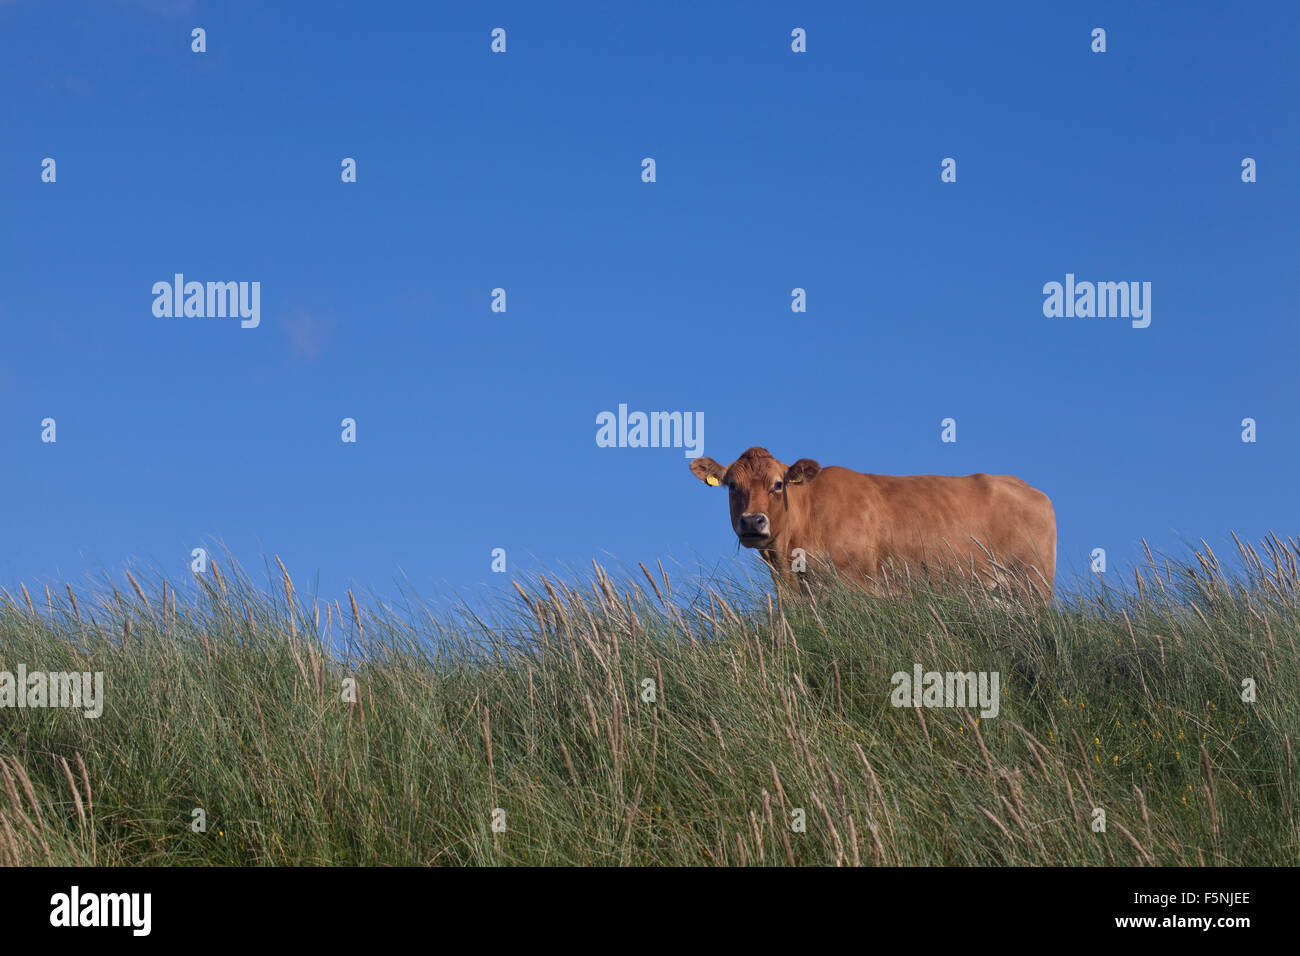 A cow stands in a field of dune grass, looking out of the image. She is in contrast with the brilliant blue summer sky. Stock Photo